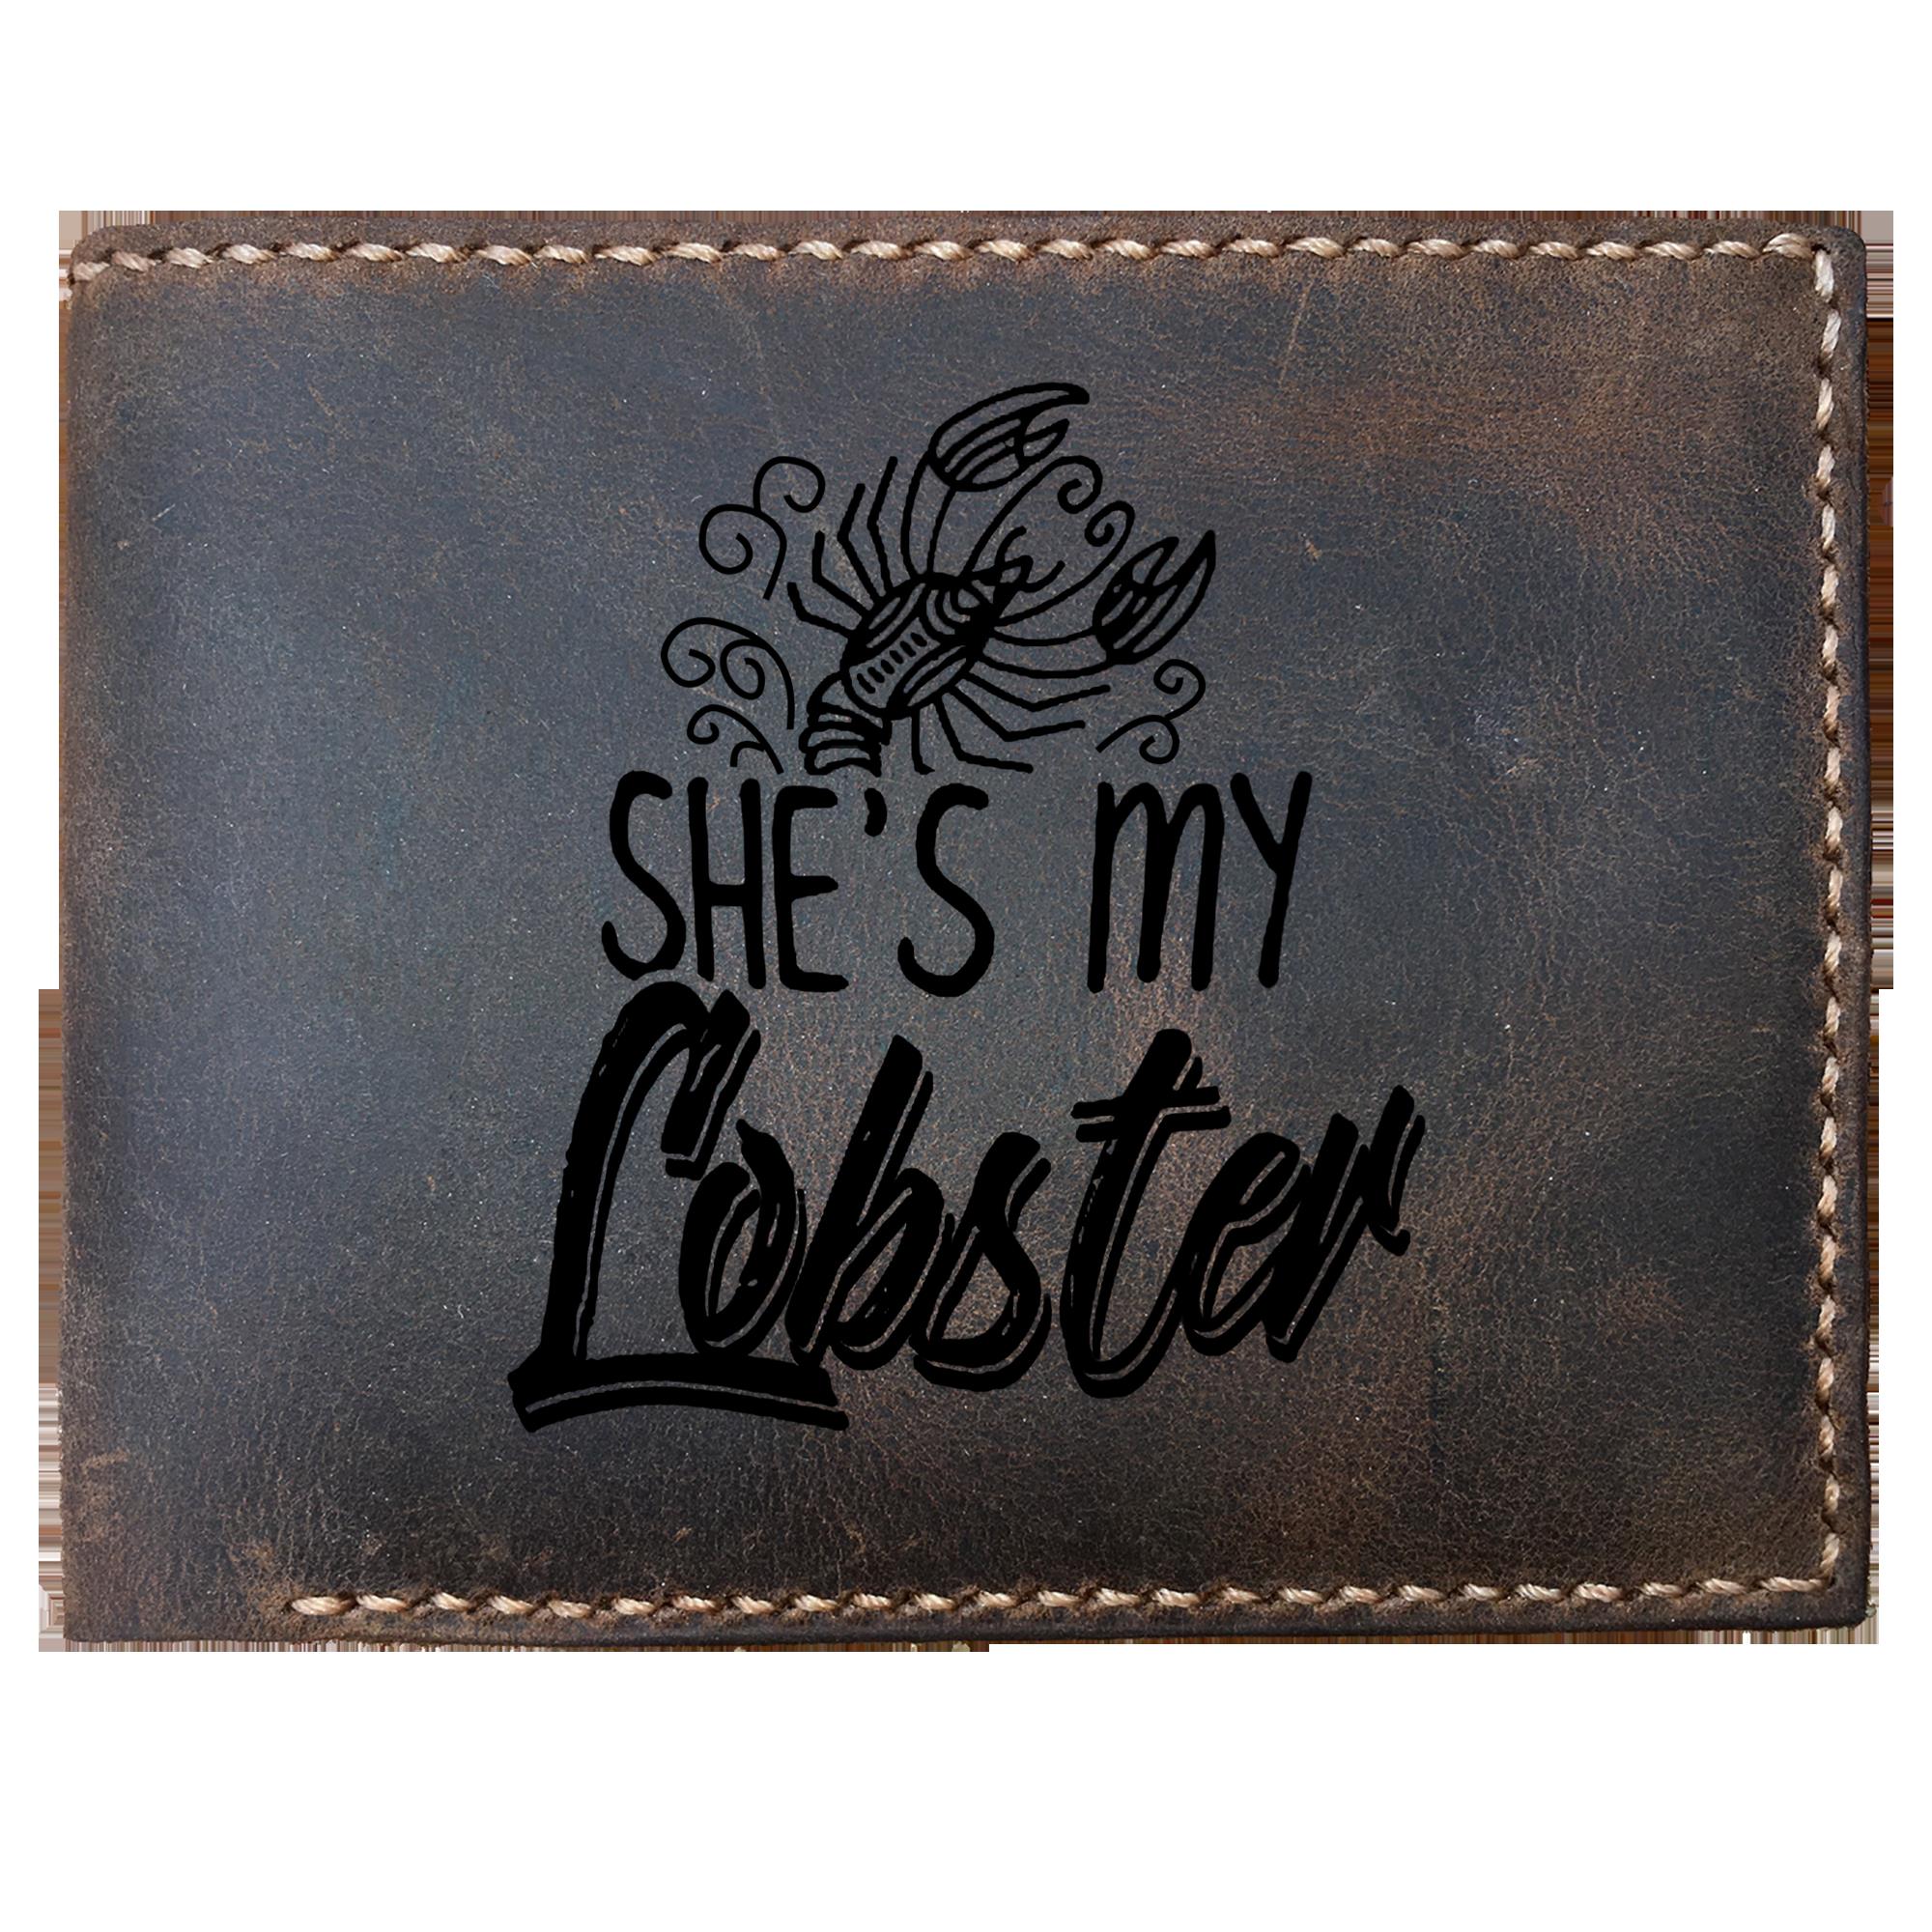 Skitongifts Funny Custom Laser Engraved Bifold Leather Wallet For Men, She's My Lobster Humorous And Cute